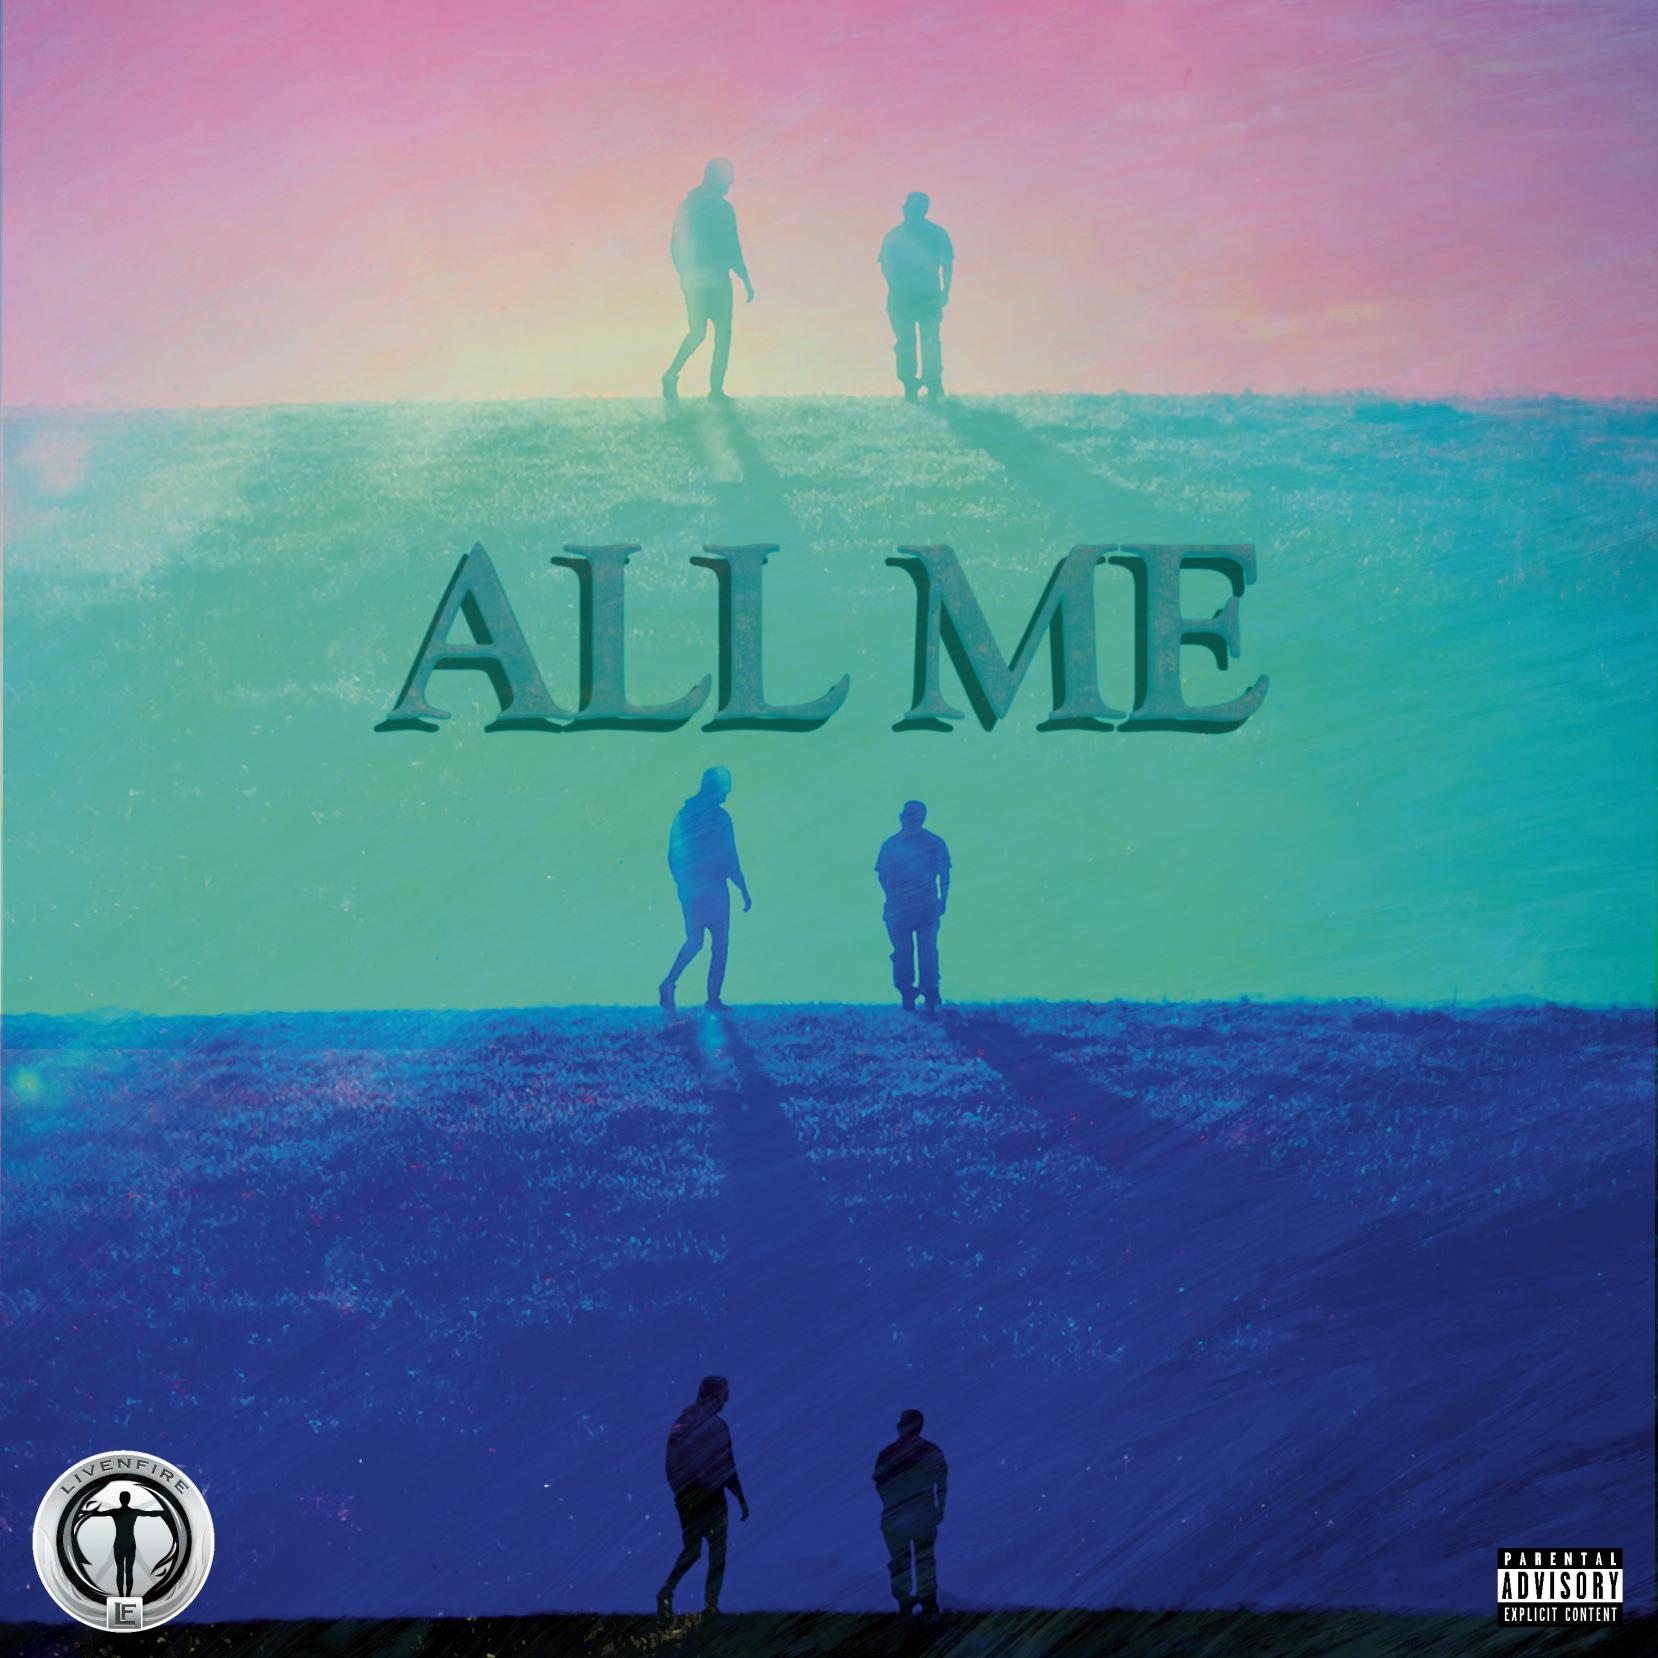 All Me - XienHow featuring Mikey Mo the MC